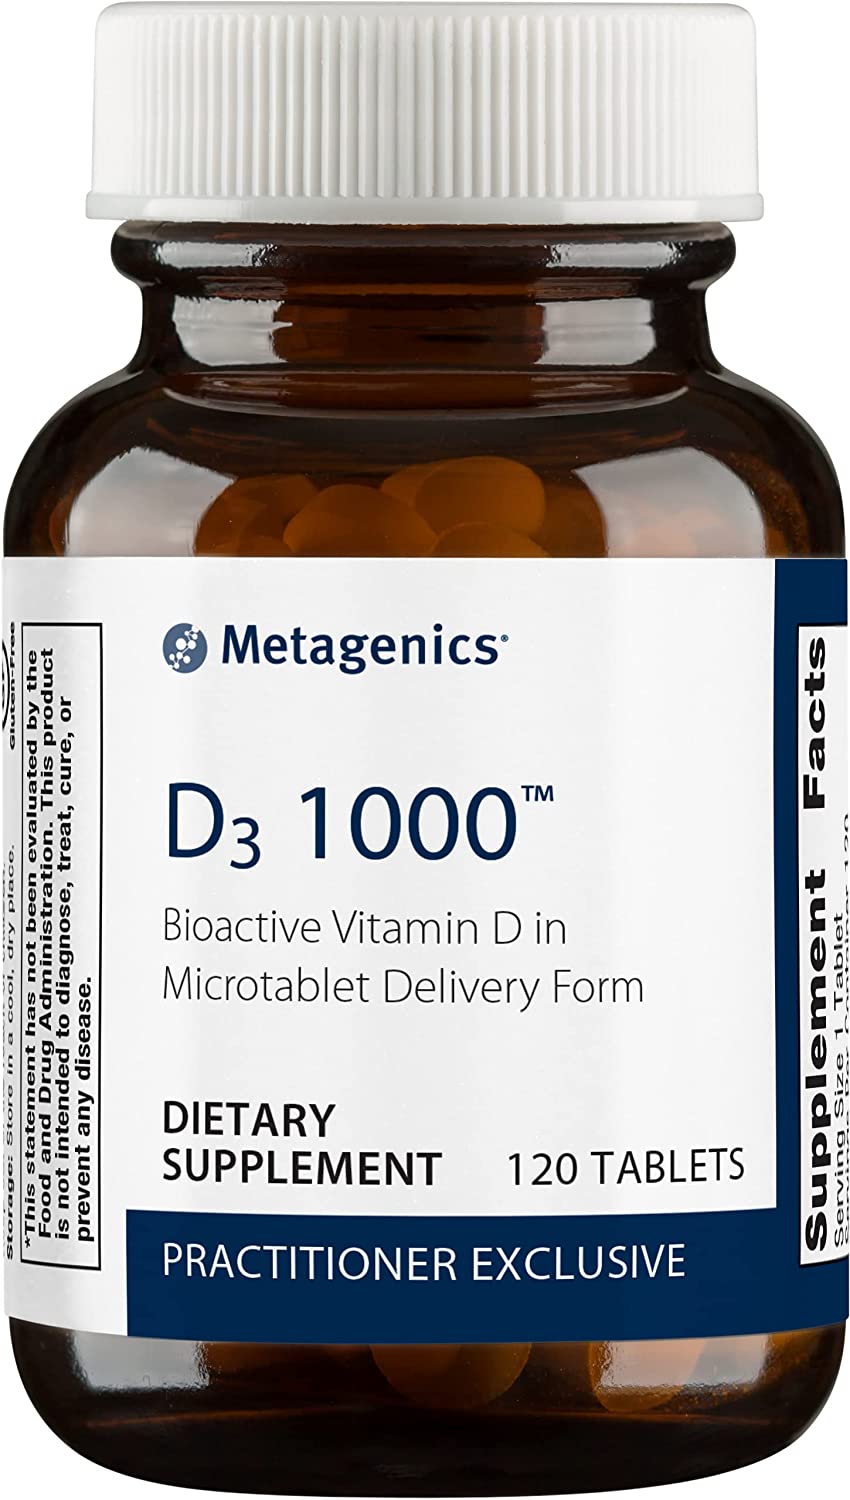 Metagenics Vitamin D3 1000 IU Vitamin D Supplement for Healthy Bone Formation Cardiovascular Health and Immune Support 120 Count